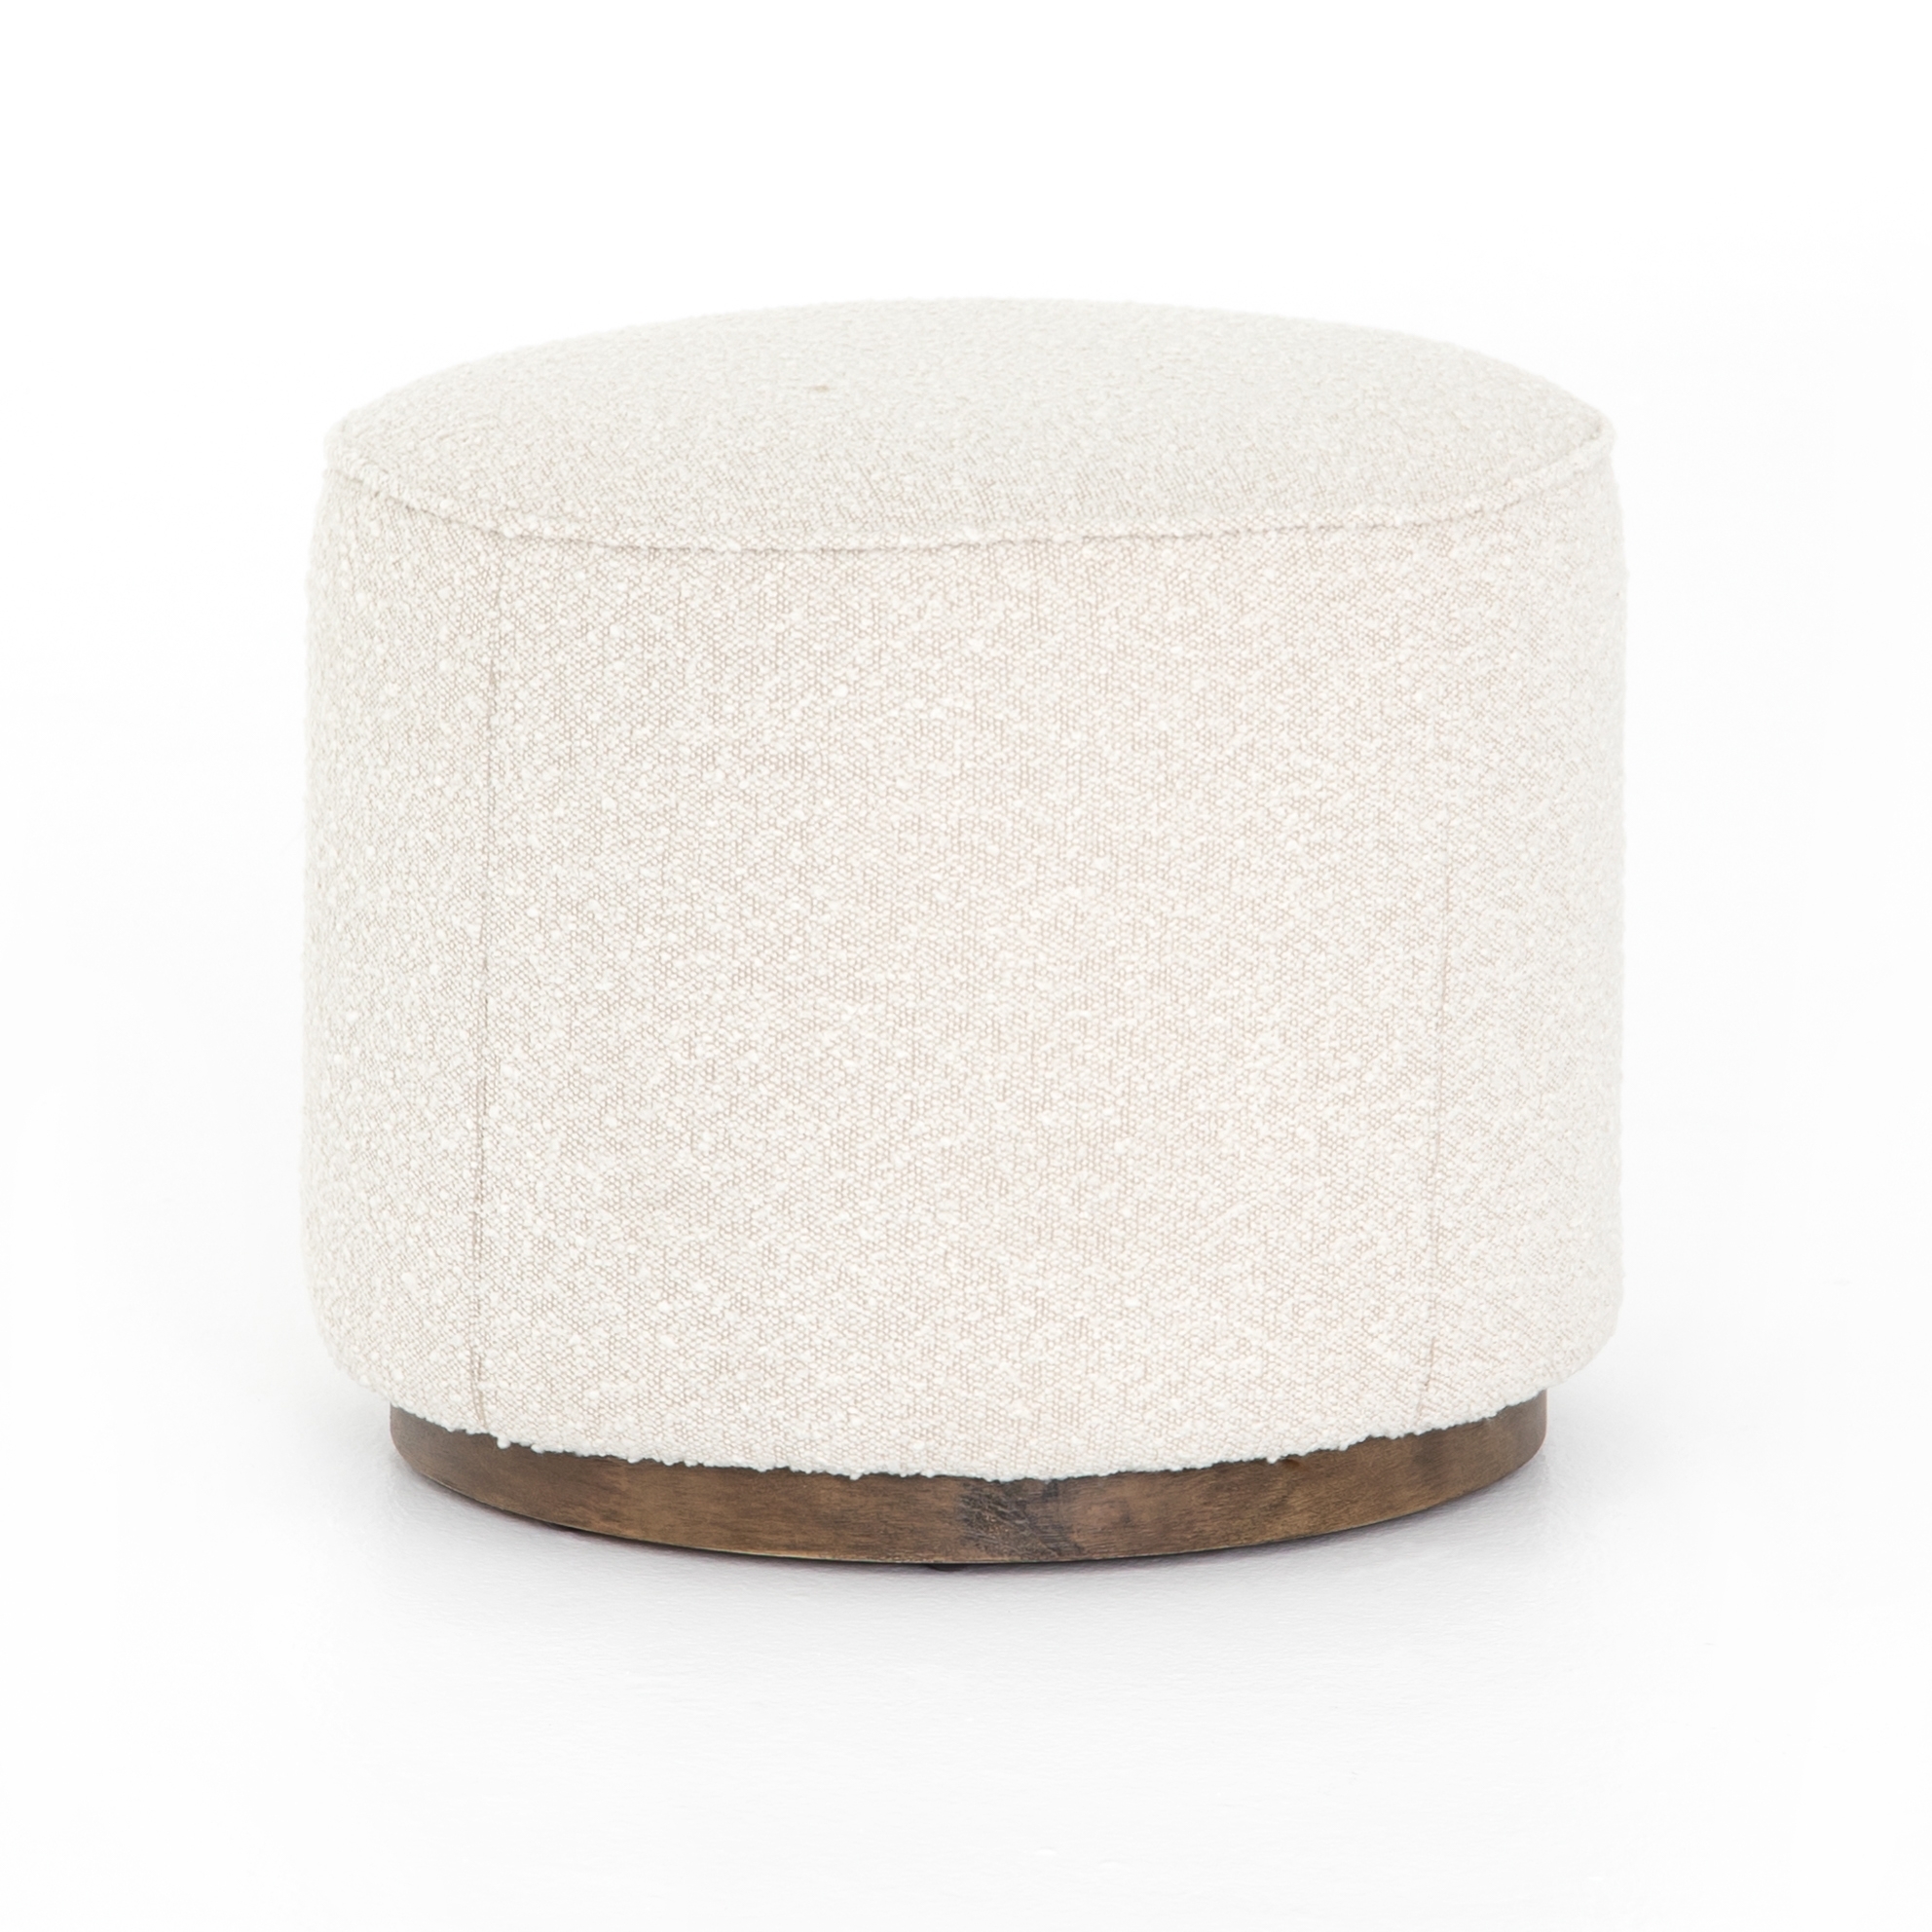 Sinclair Round Ottoman-Knoll Natural - Image 4